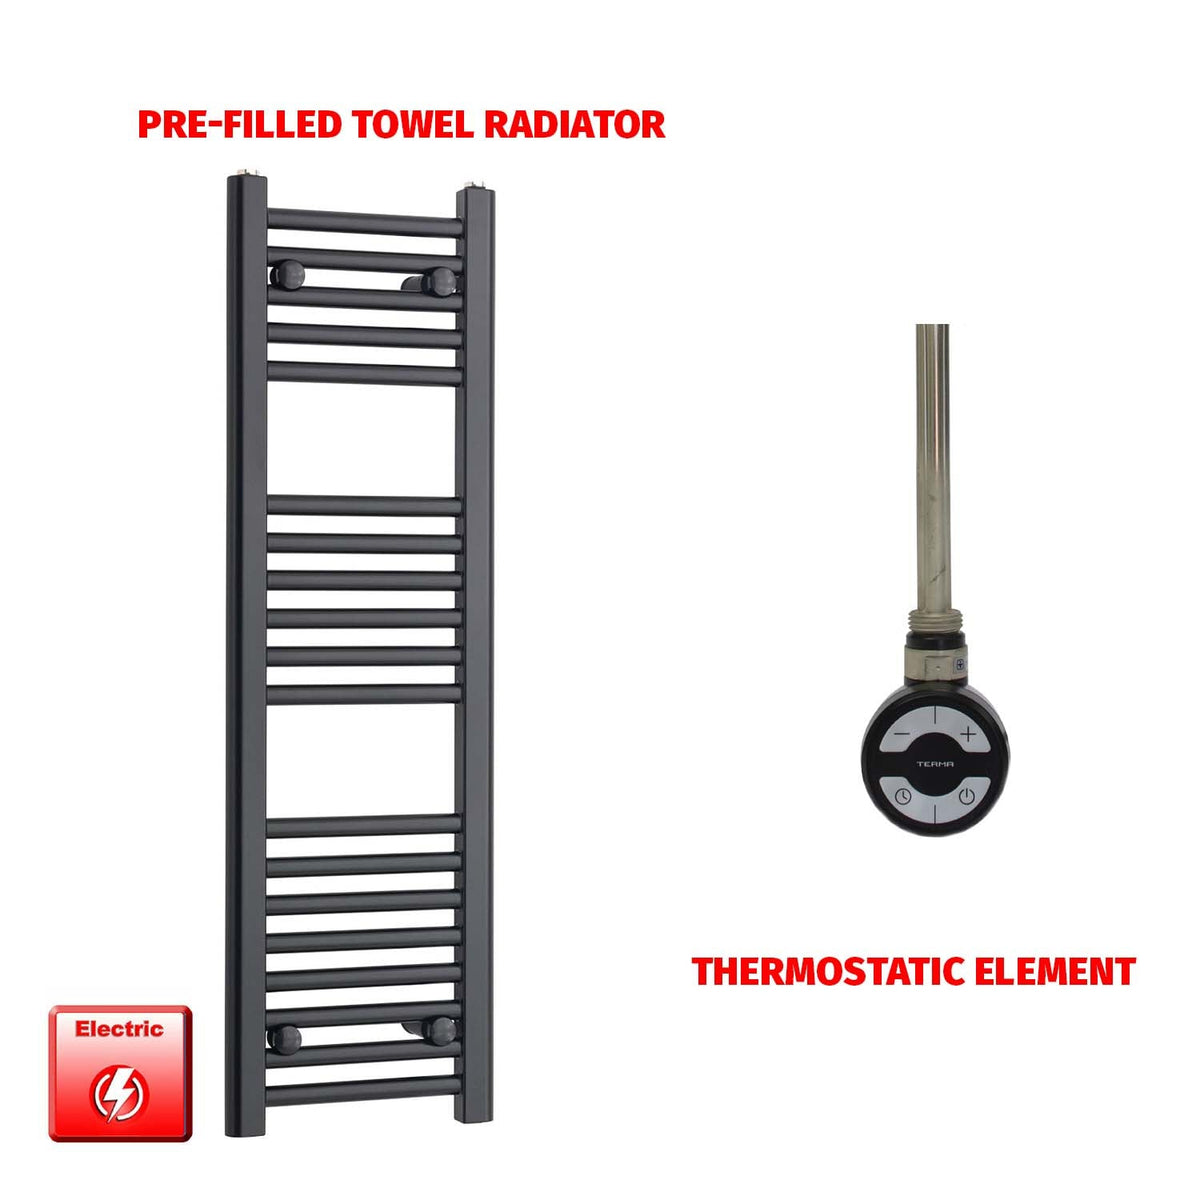 800mm High 300mm Wide Flat Black Pre-Filled Electric Heated Towel Radiator HTR MOA Thermostatic No Timer